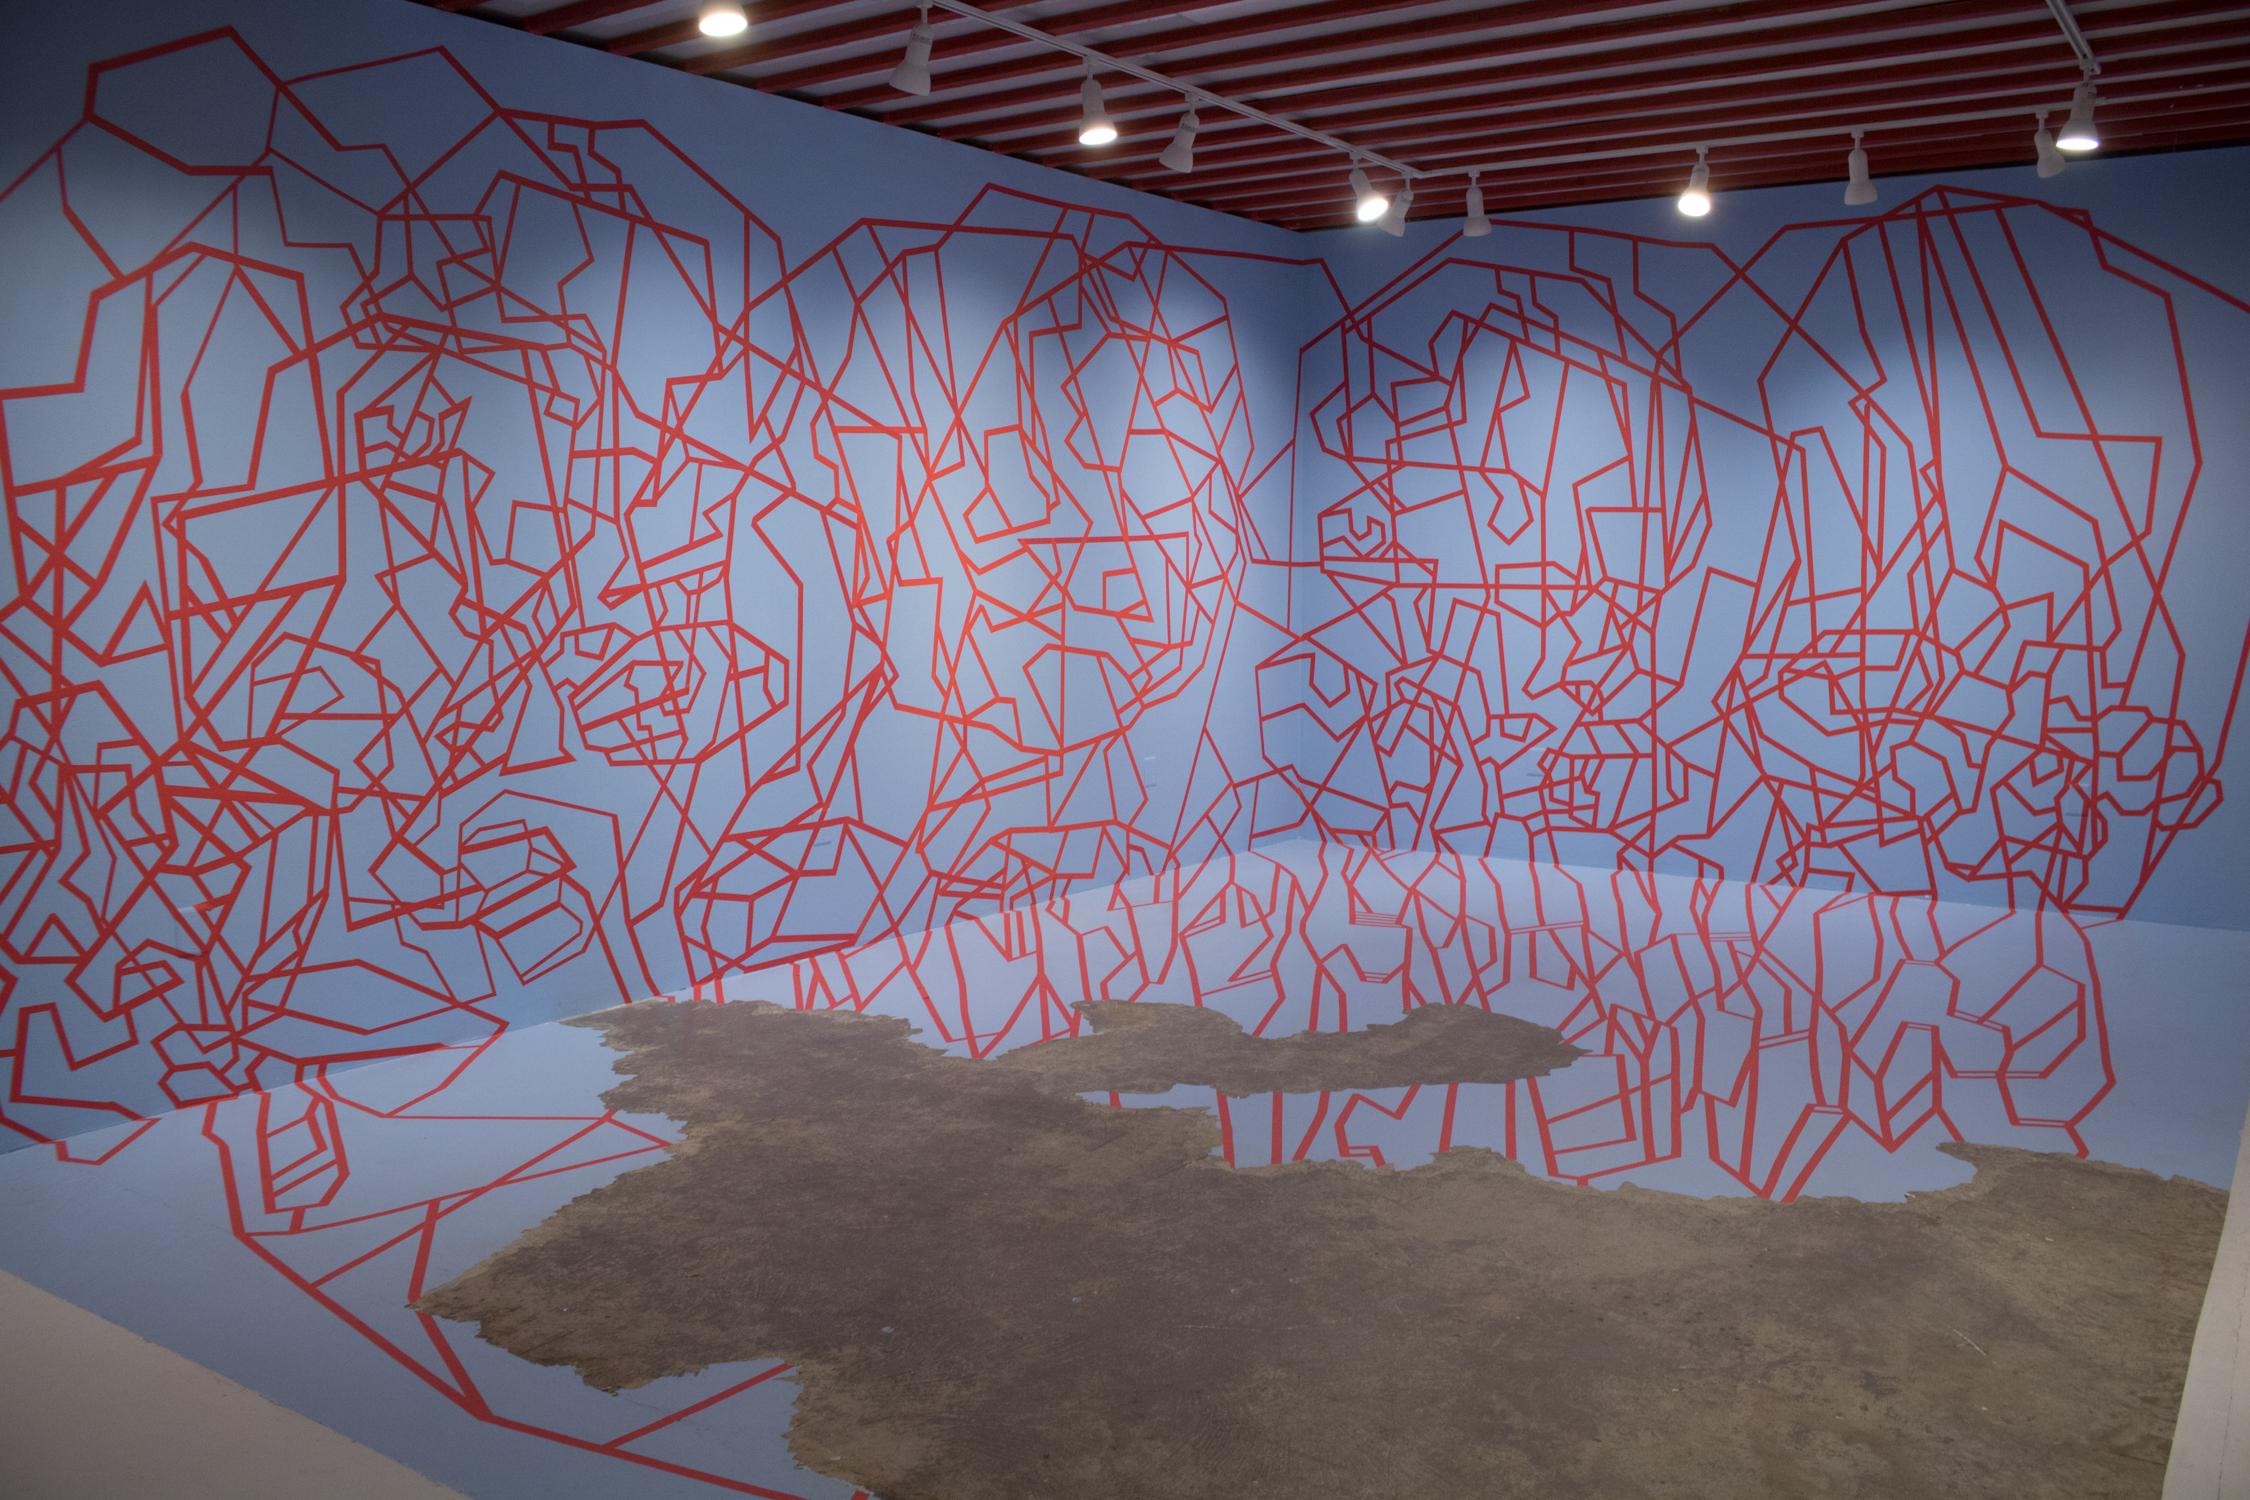 DUSTIN HEDRICK TAPE INSTALLATION - Blue Paint & Red tape - "Cutting Edge" Mural